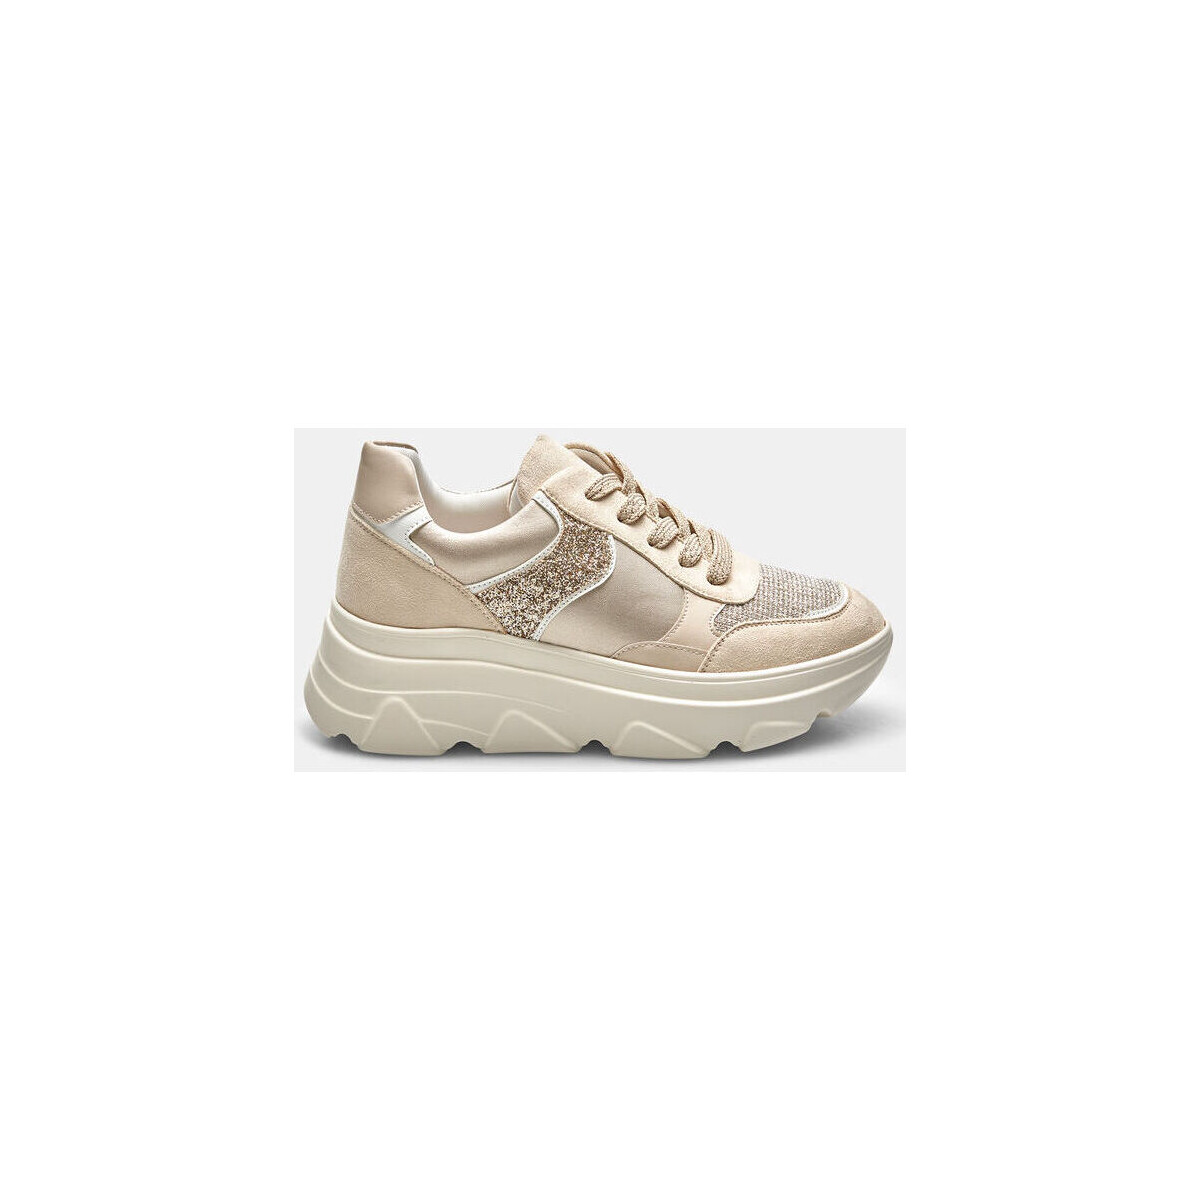 Chaussures Femme Sneakers Sergio Bardi Young SBY-02-03-000041 686 Sneakers pour femme avec semelle Beige